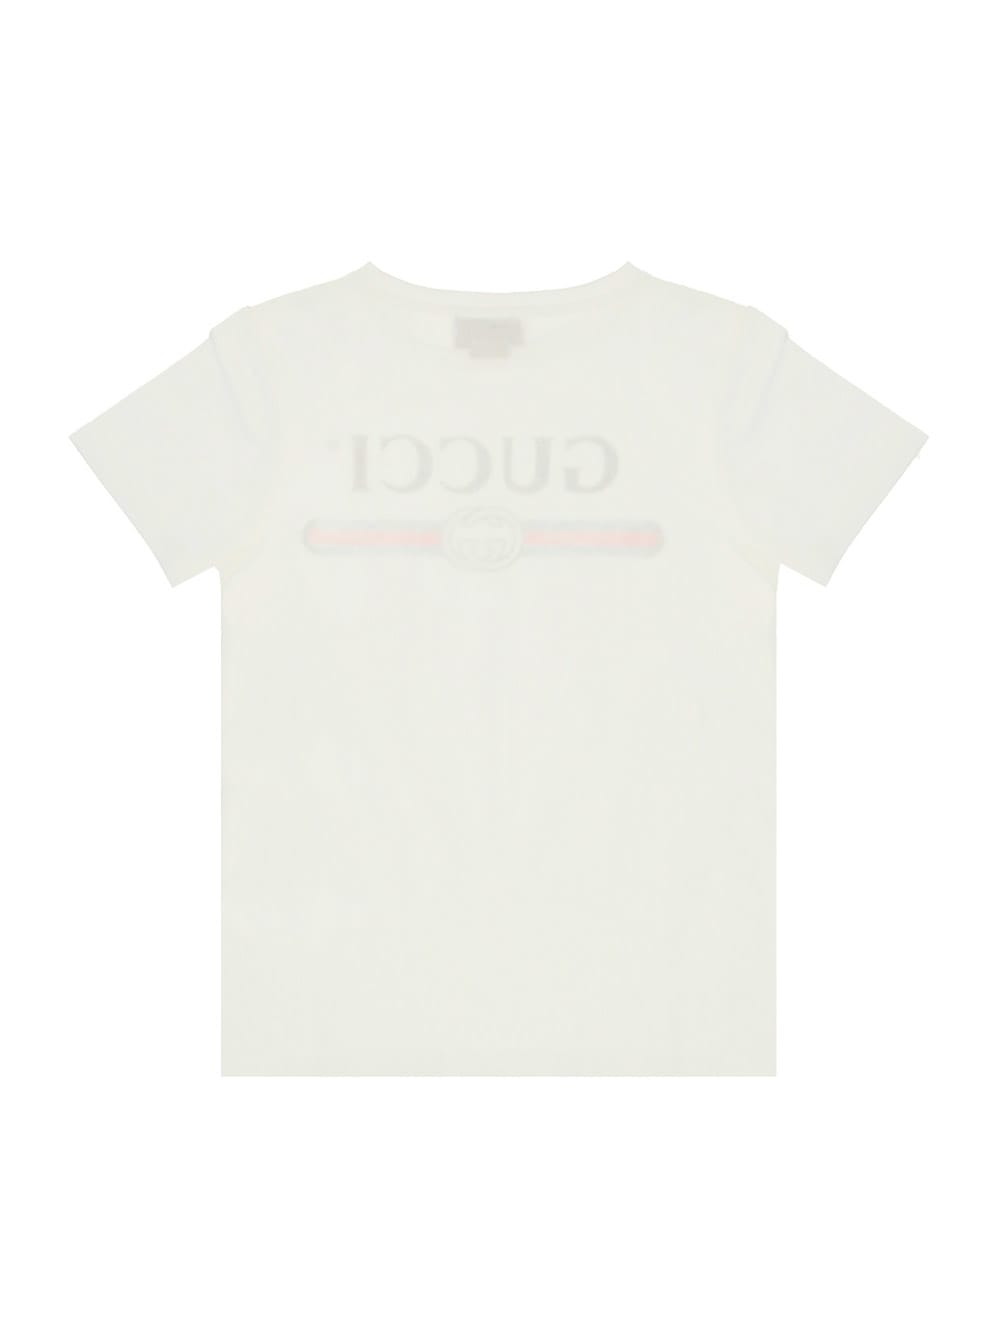 Shop Gucci T-shirt For Boy In White